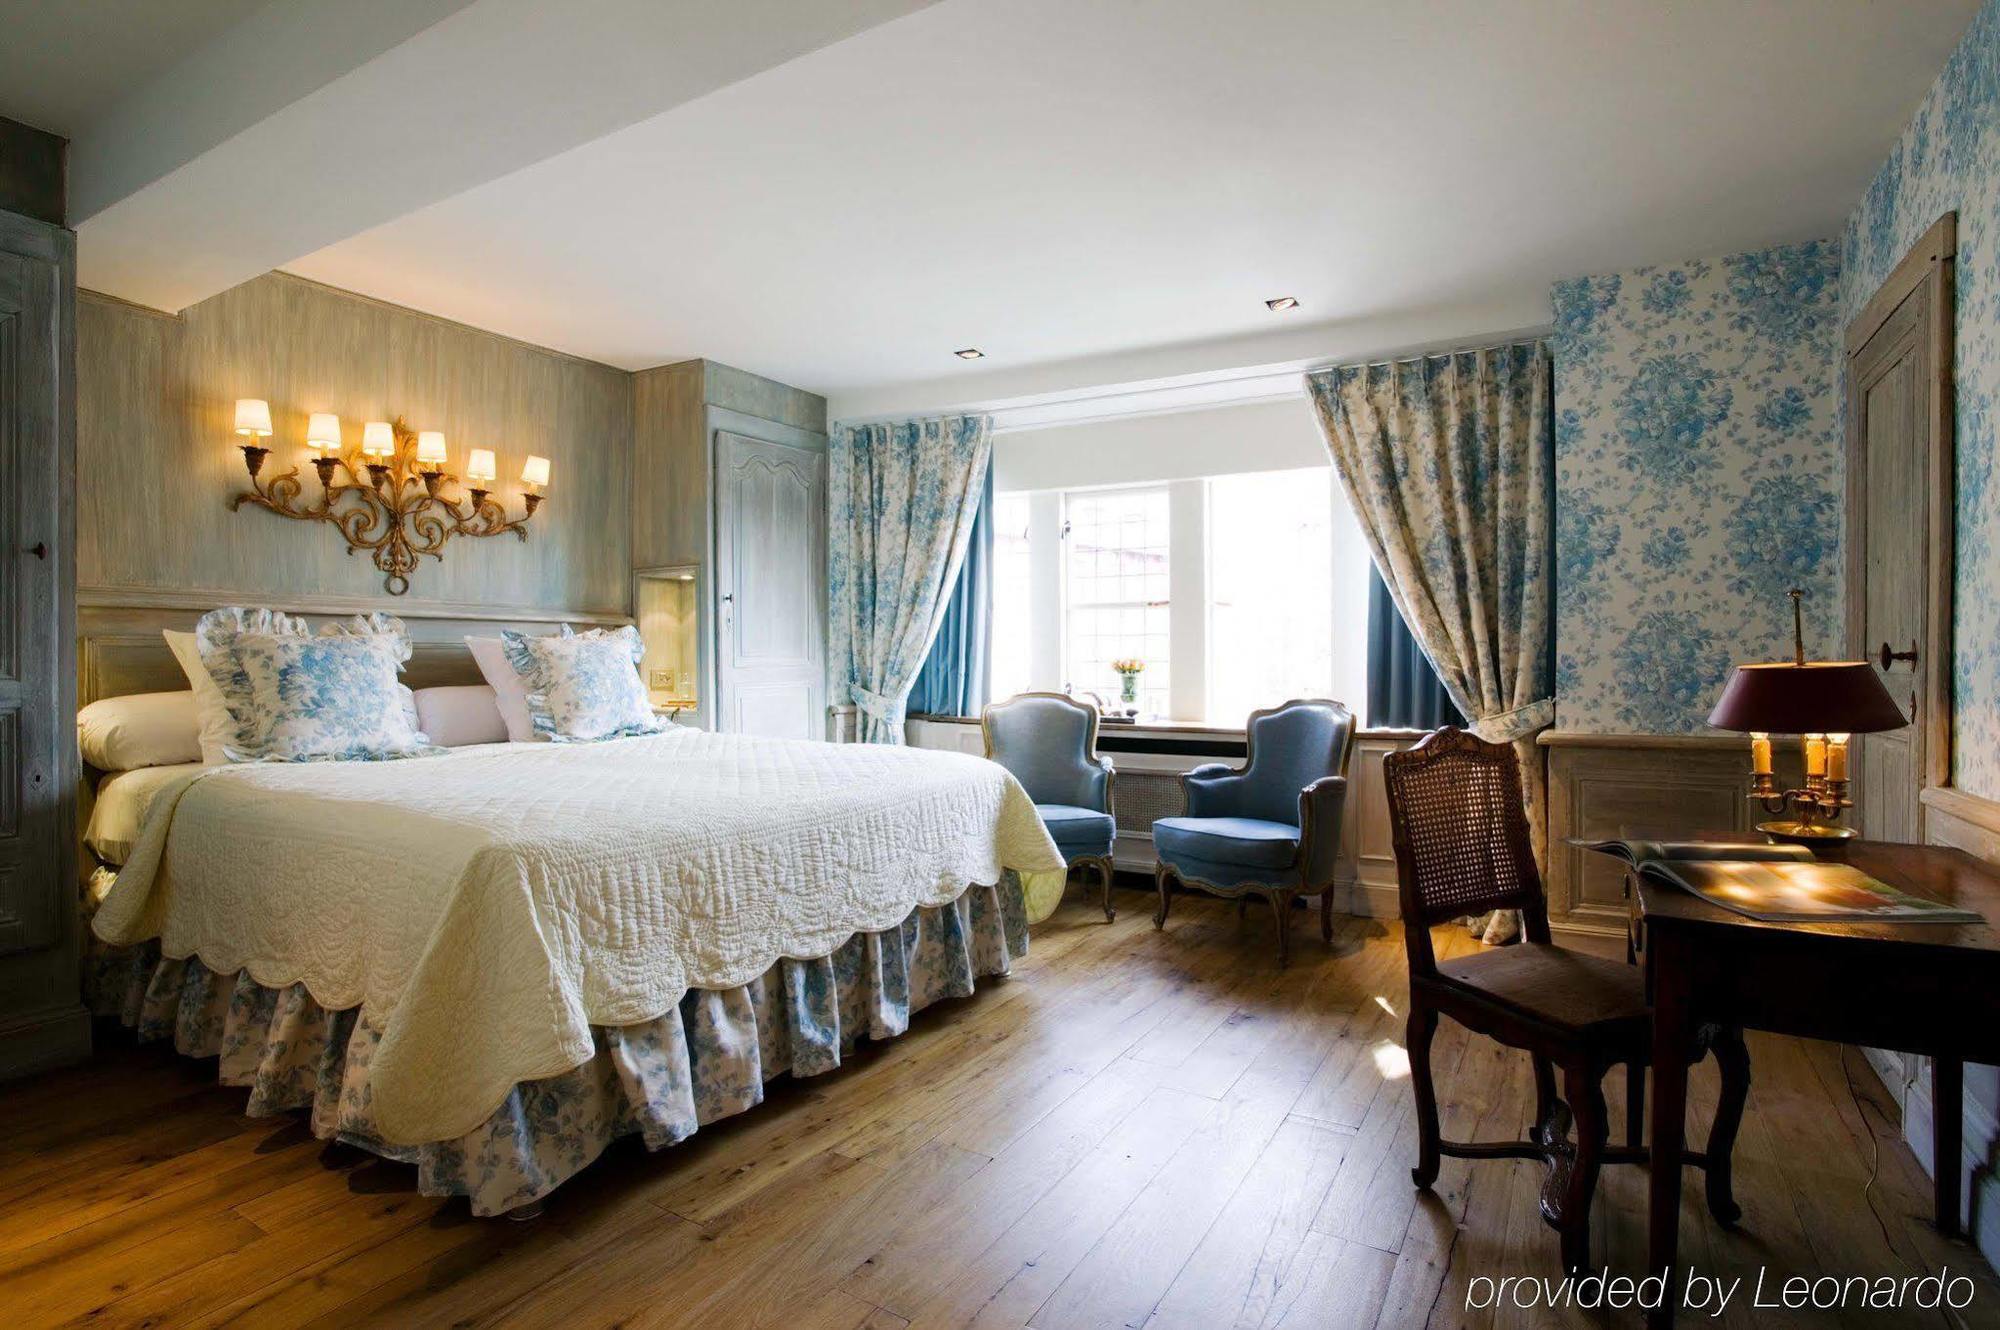 Relais Bourgondisch Cruyce, A Luxe Worldwide Hotel Bruges Esterno foto